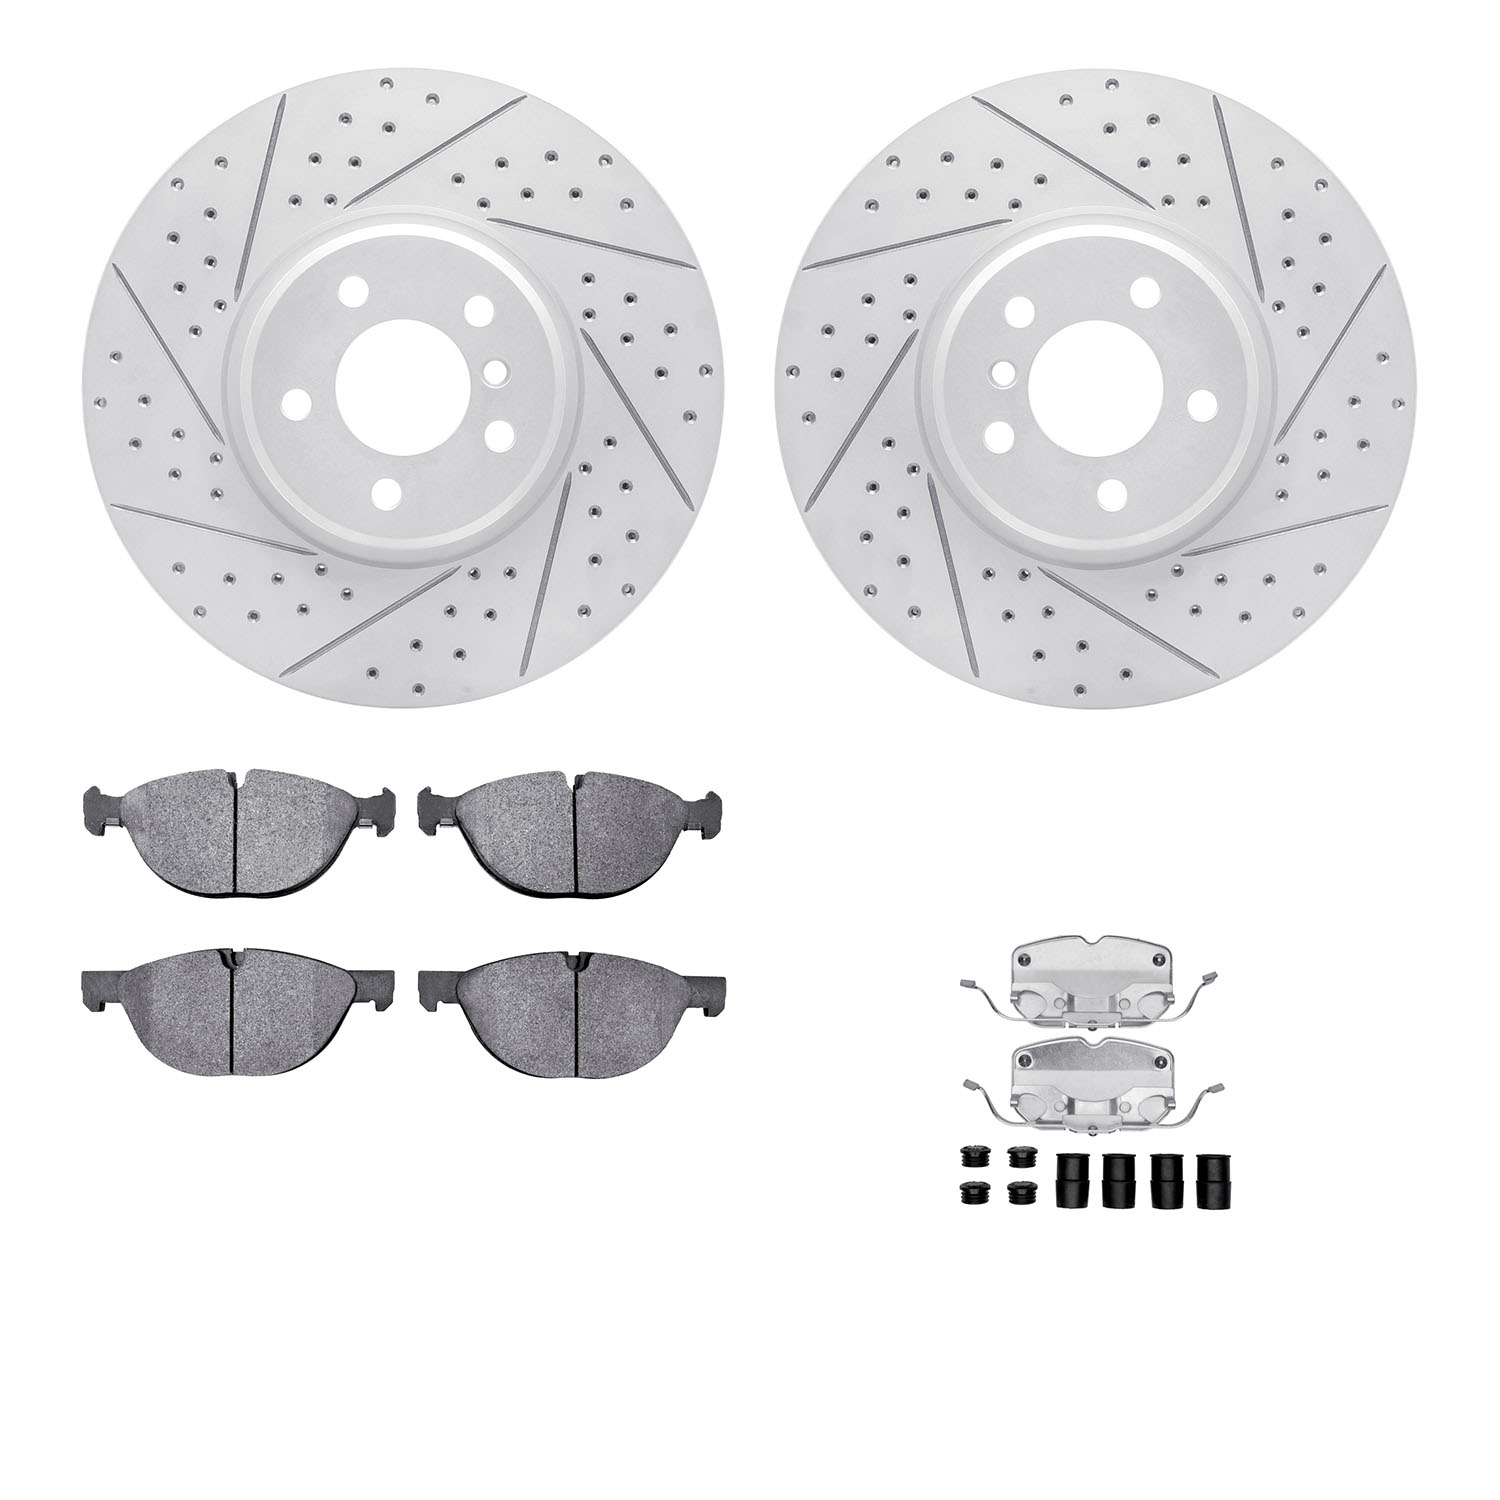 2512-31110 Geoperformance Drilled/Slotted Rotors w/5000 Advanced Brake Pads Kit & Hardware, 2008-2014 BMW, Position: Front